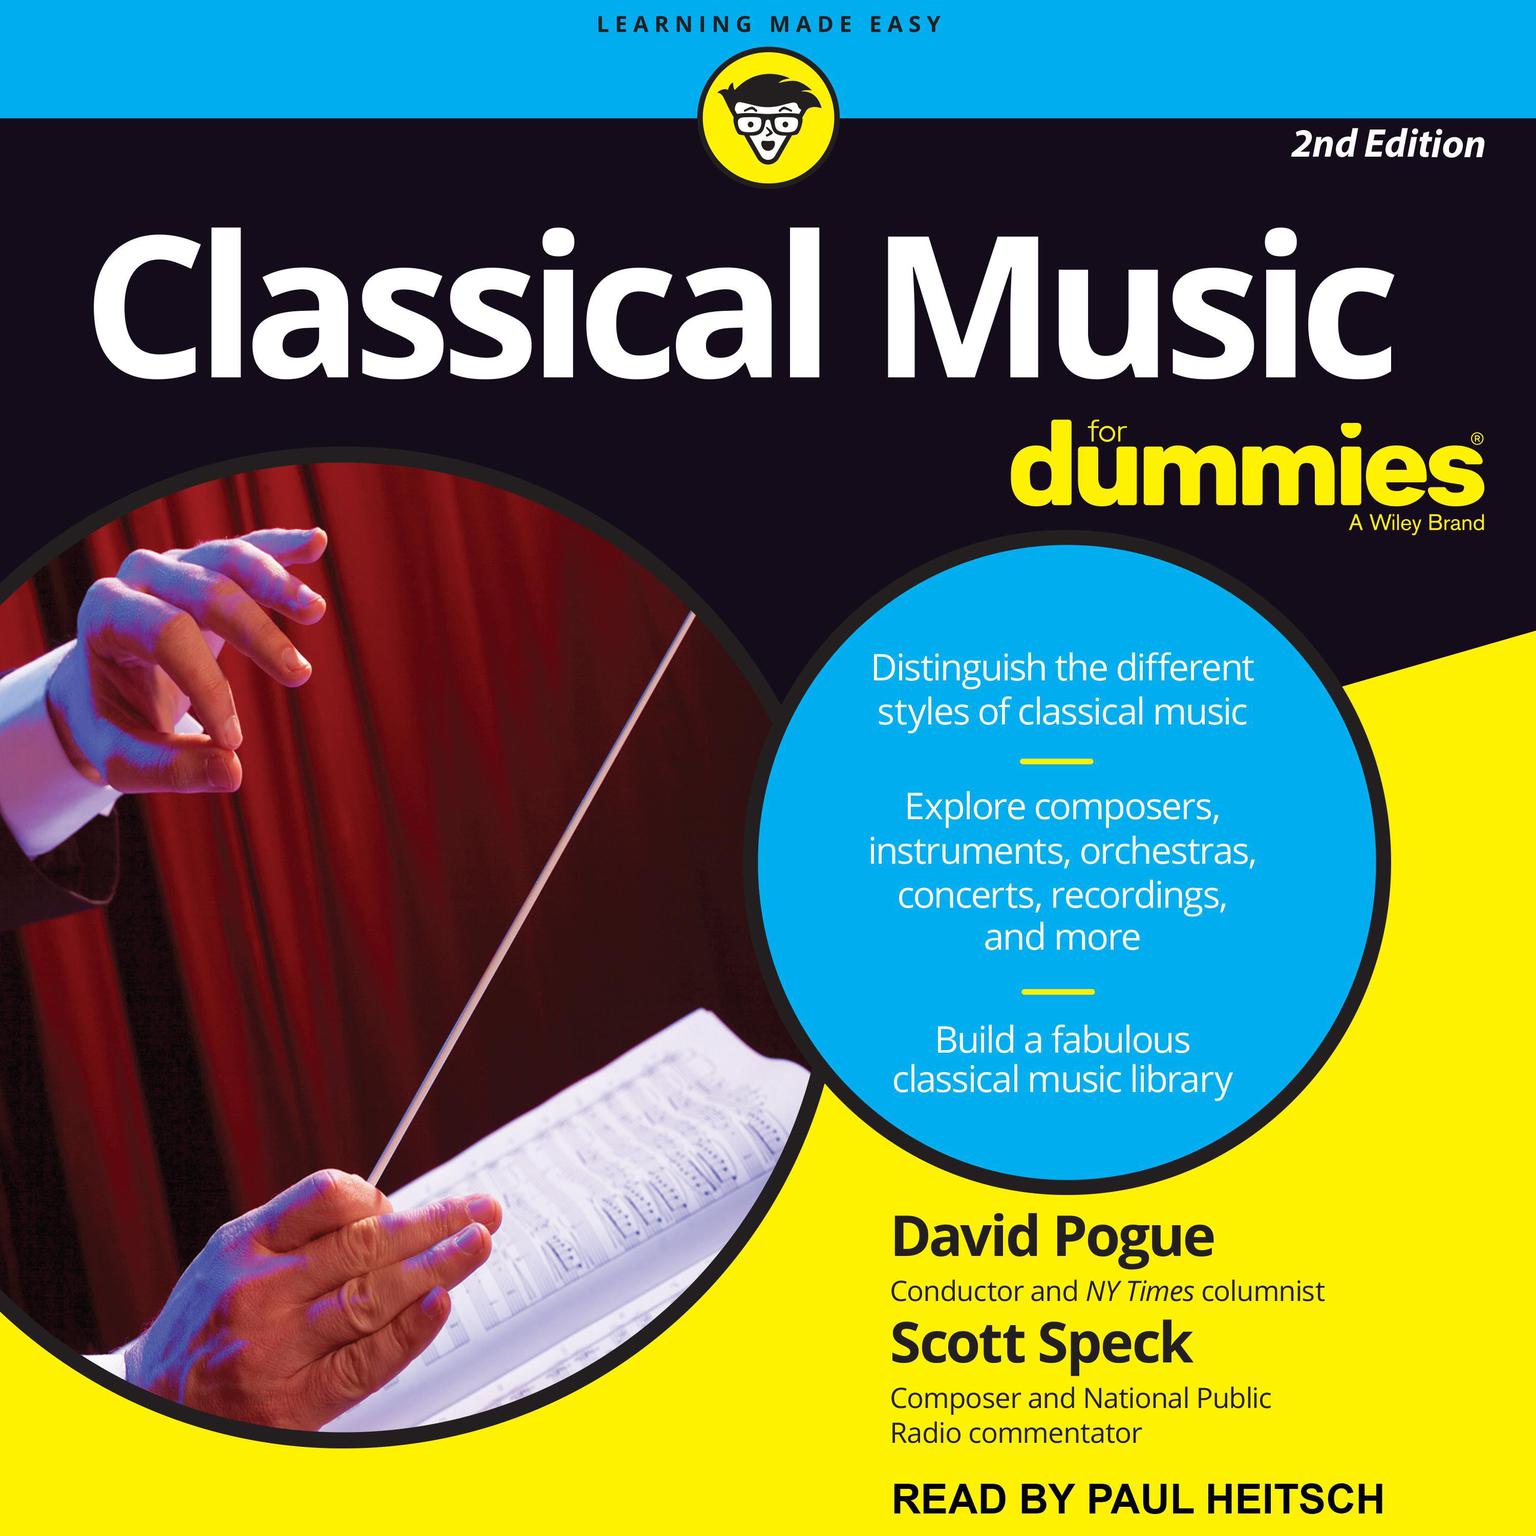 Classical Music For Dummies: 2nd Edition Audiobook, by David Pogue